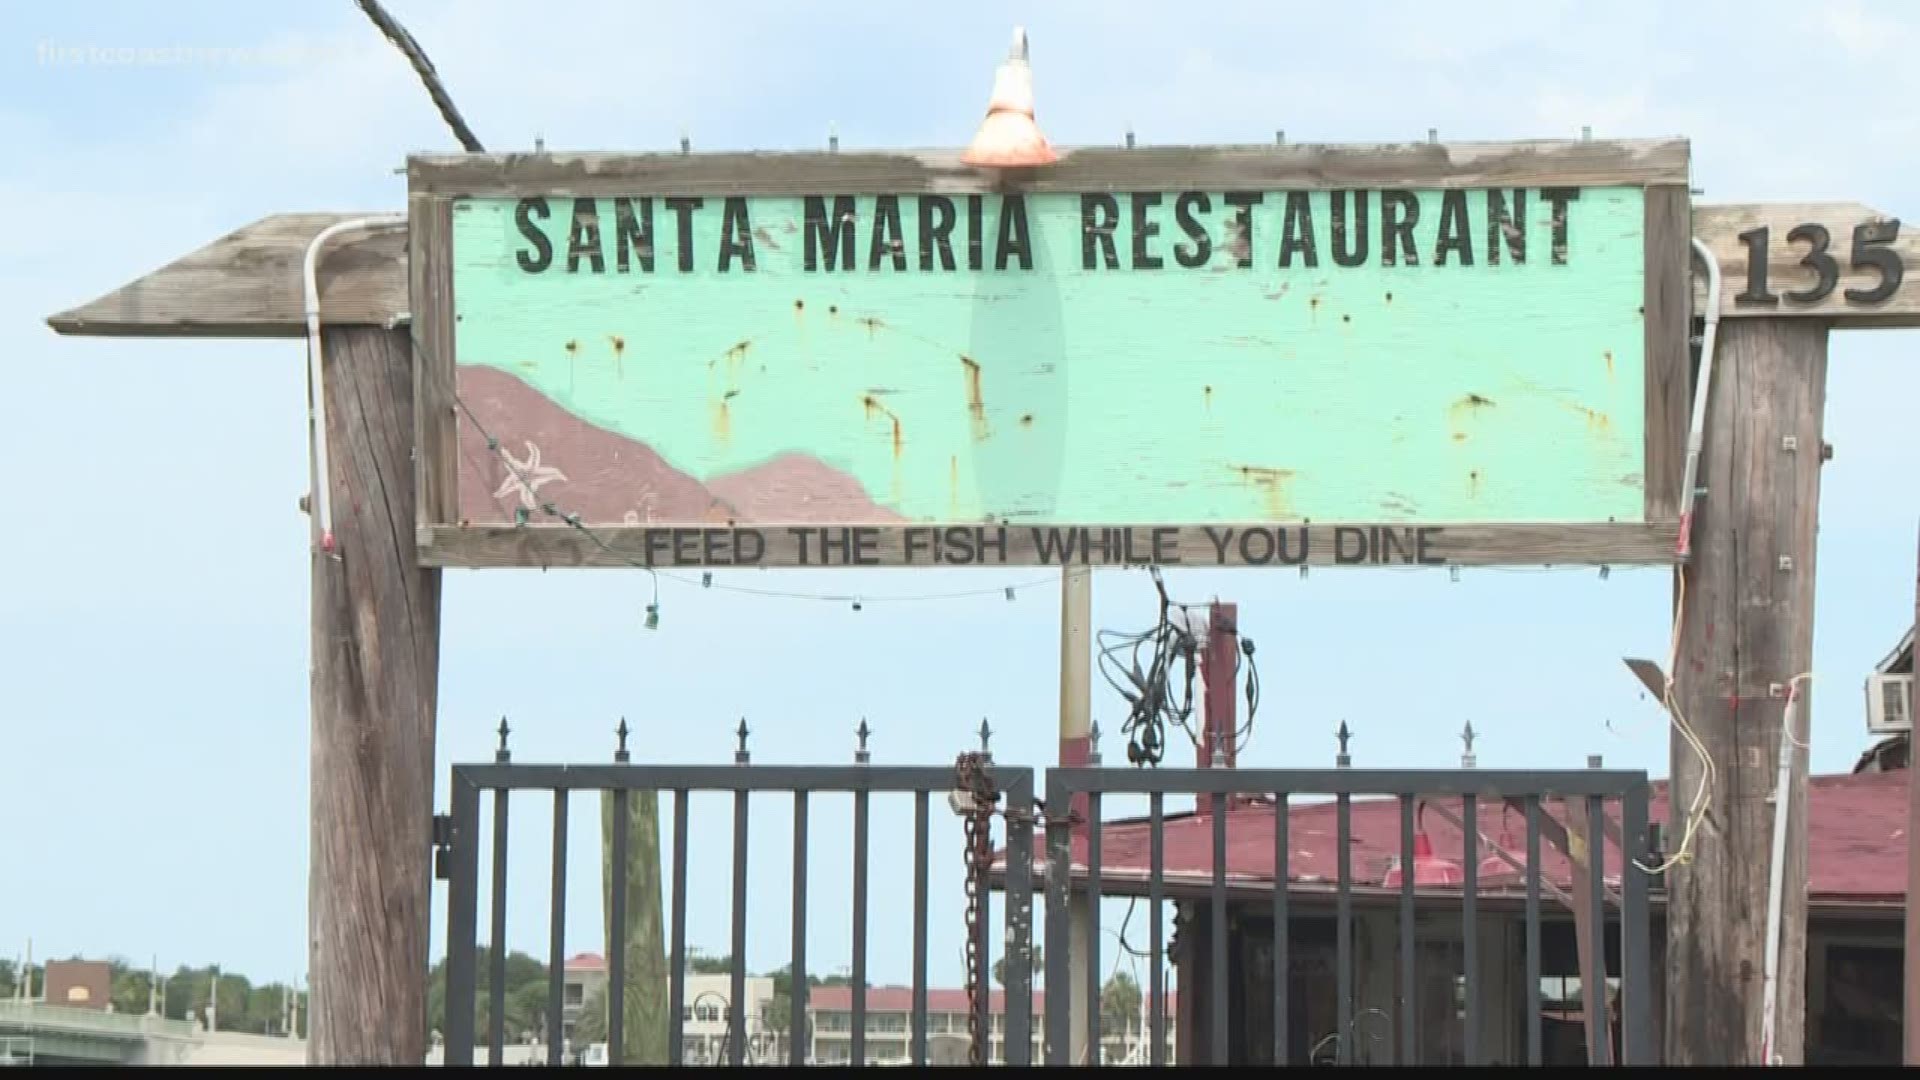 St. Augustine's Santa Maria restaurant dates back to the 1950s and used to be the place to go for tourists. Now, many call the dilapidated building an eyesore.